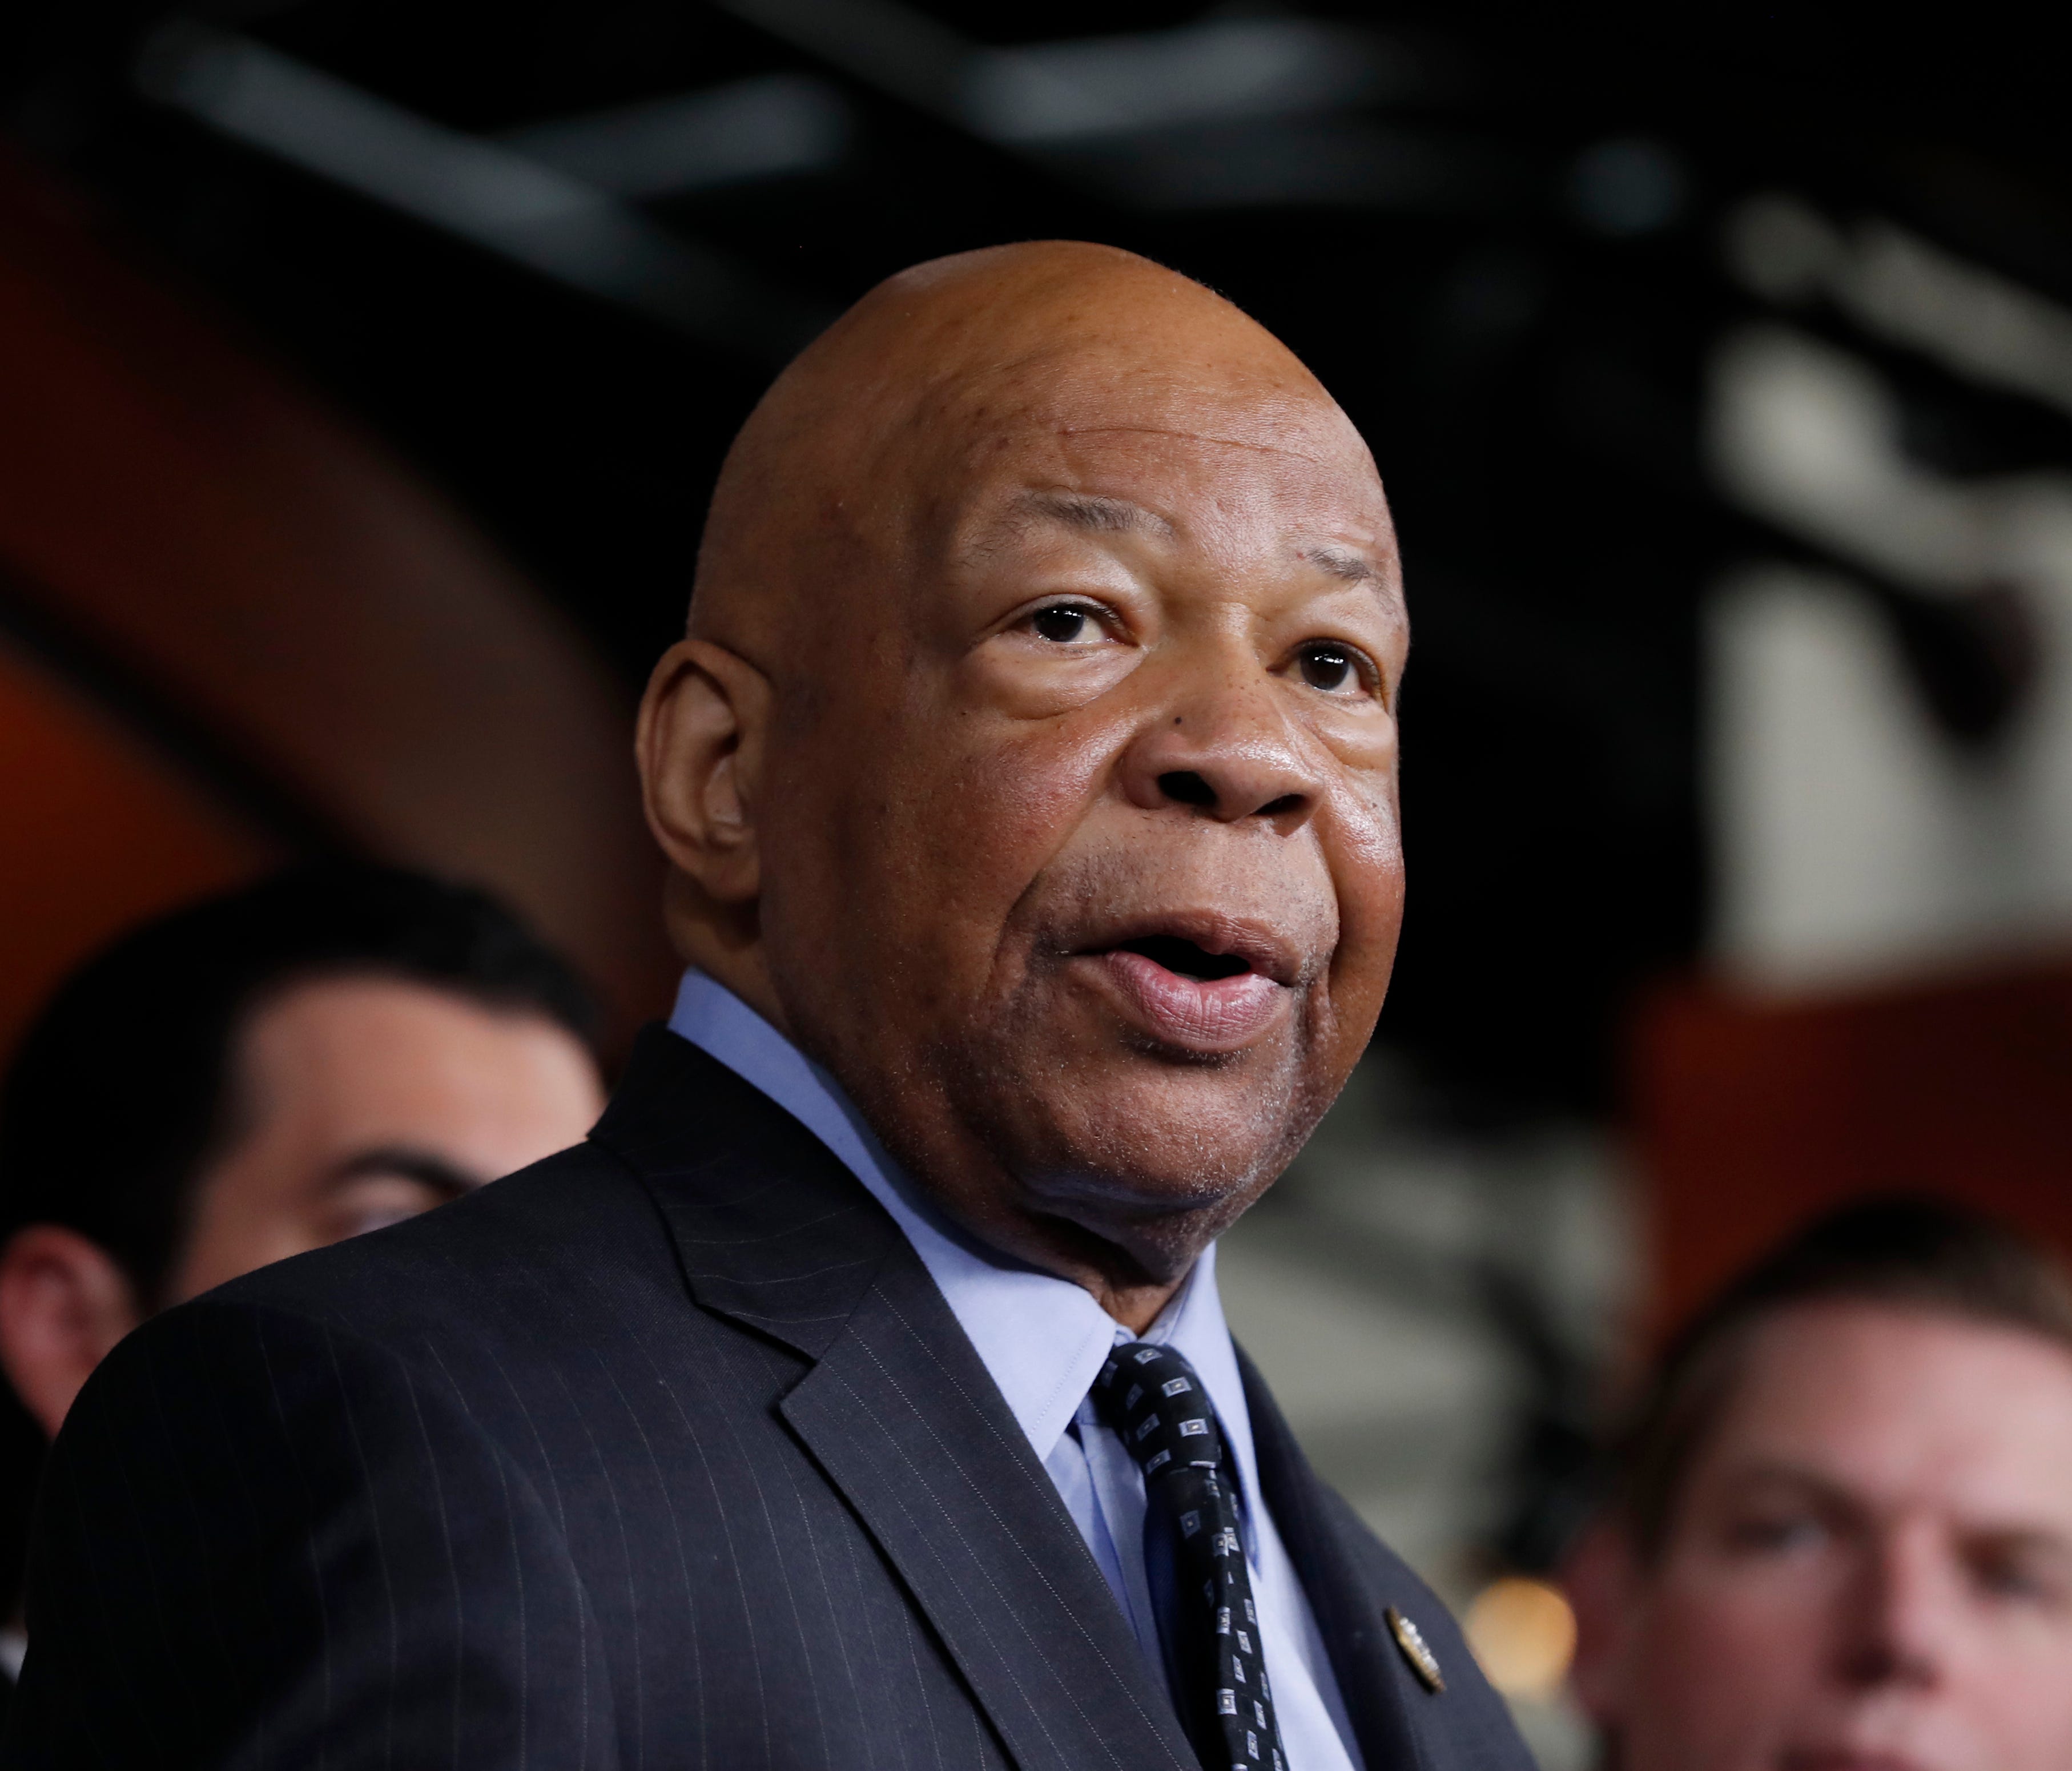 In this May 17, 2017 file photo, Rep. Elijah Cummings, D-Md. speaks during a news conference on Capitol Hill in Washington.